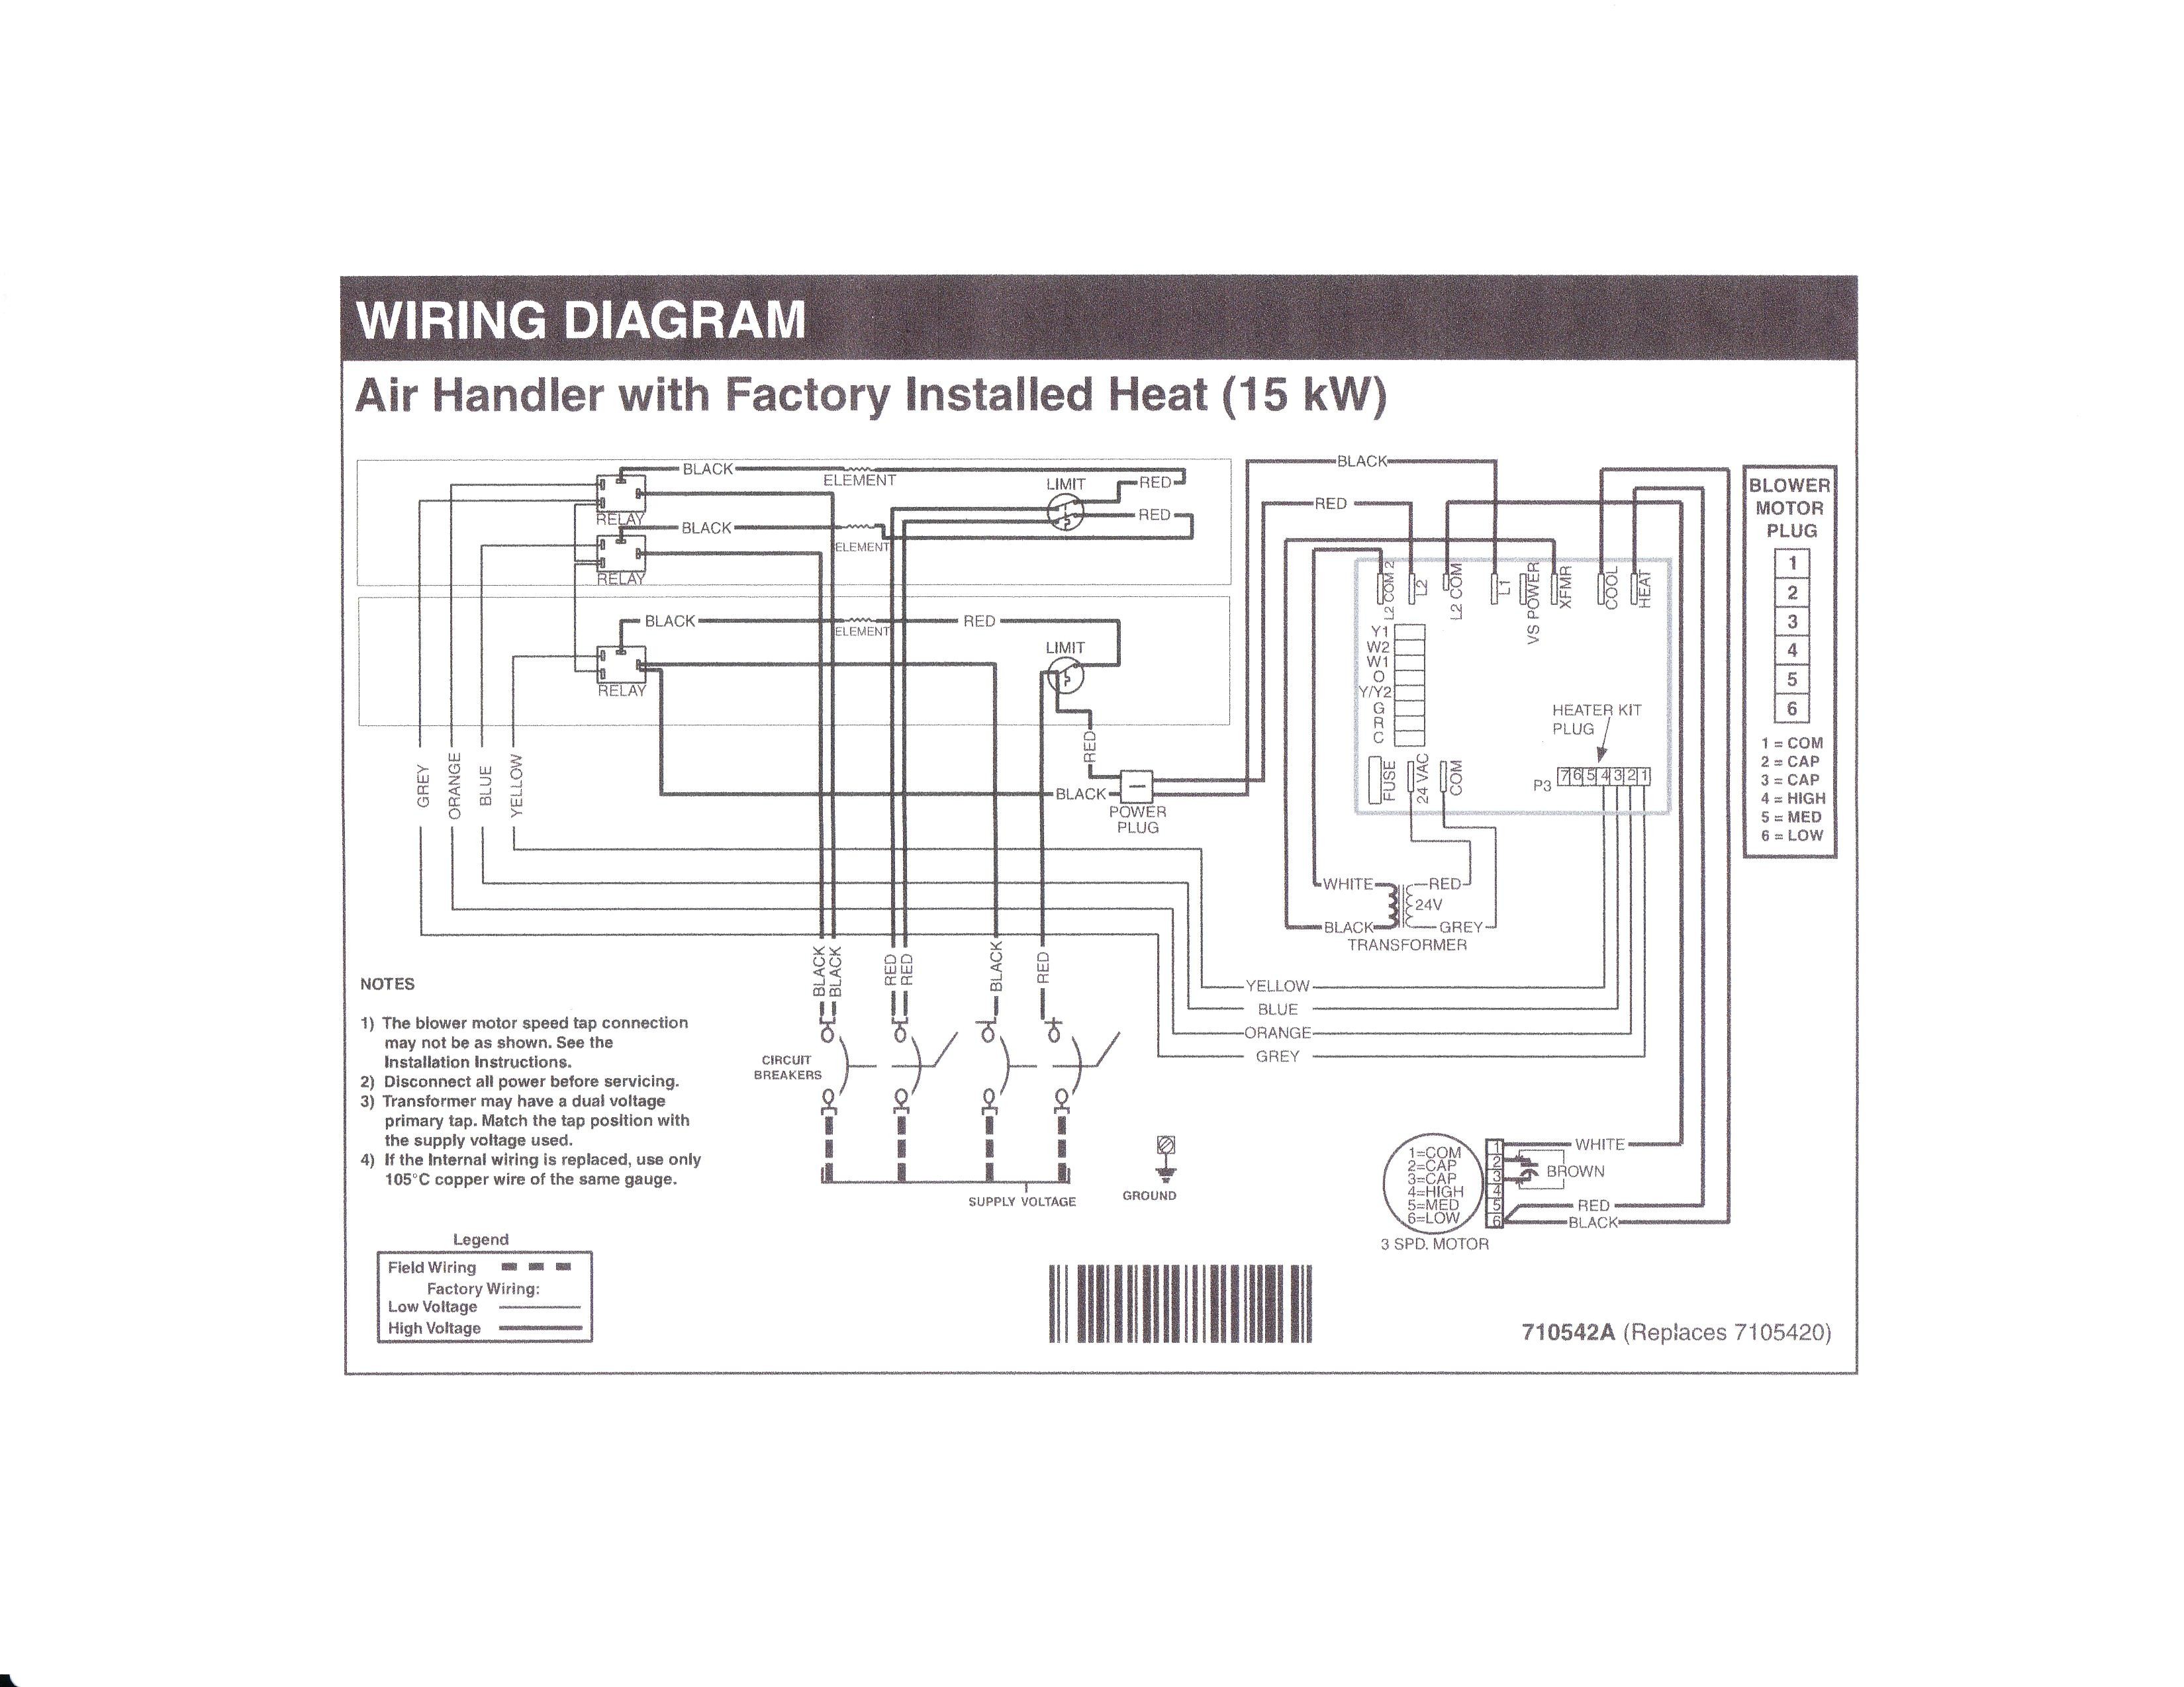 Mobile Home Wiring Diagram Gas Furnace Wiring Diagram for Intertherm Electric Electrical Of Mobile Home Wiring Diagram